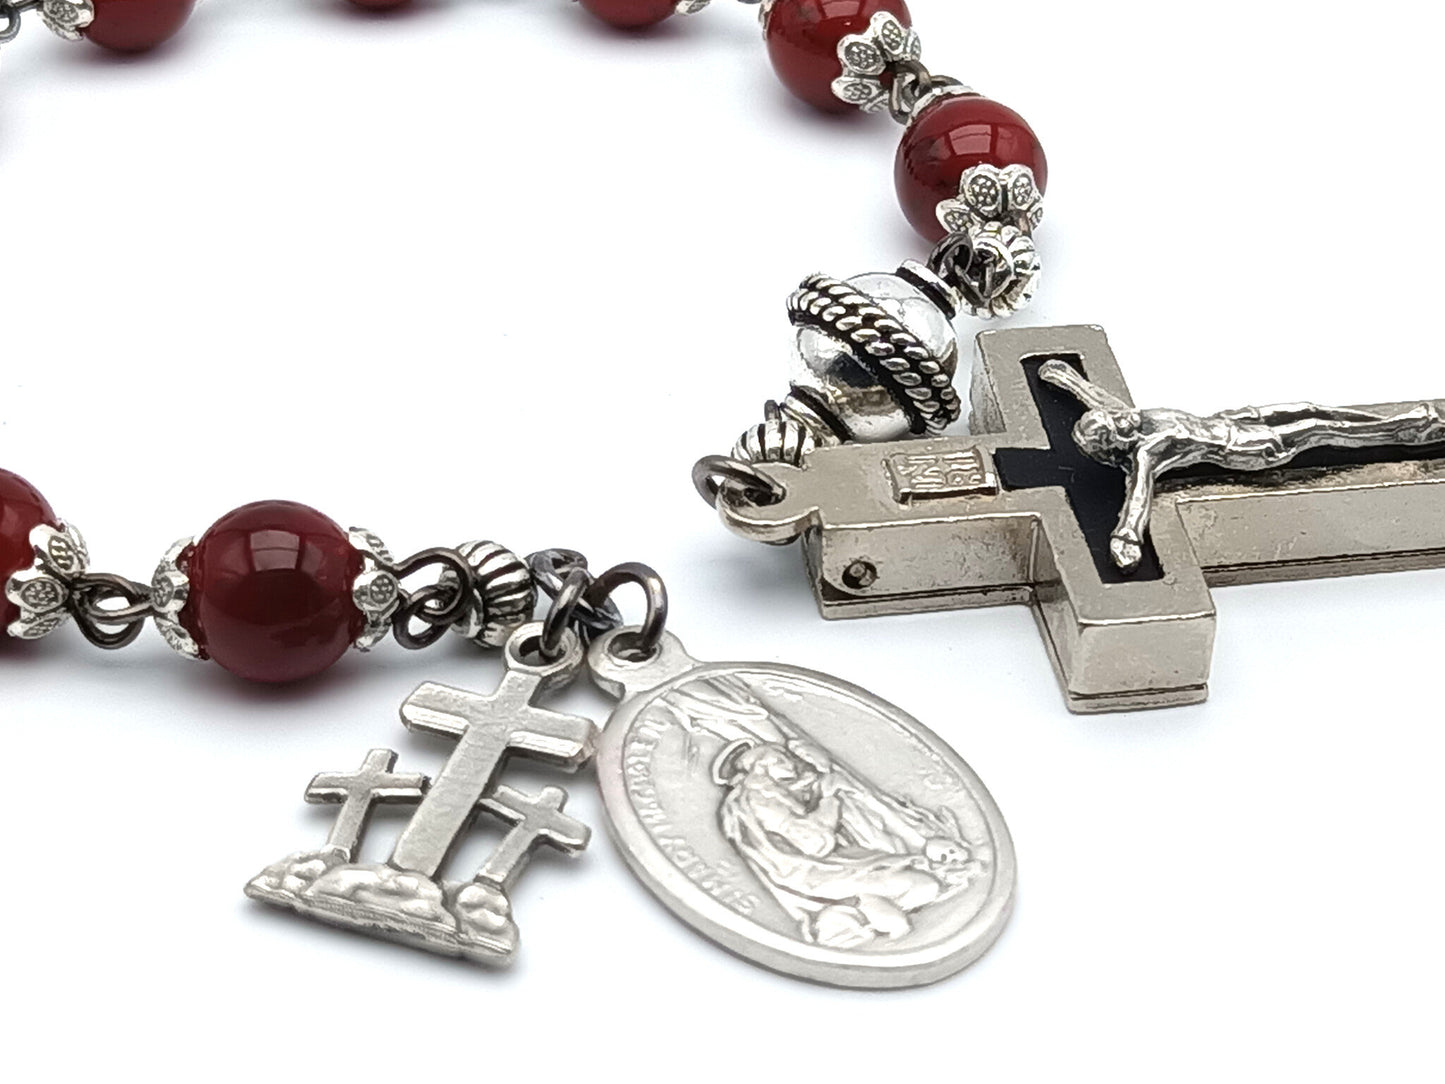 Saint Mary Magdalene unique rosary beads single decade with red glass beads, reliquary crucifix, silver pater bead and medals.